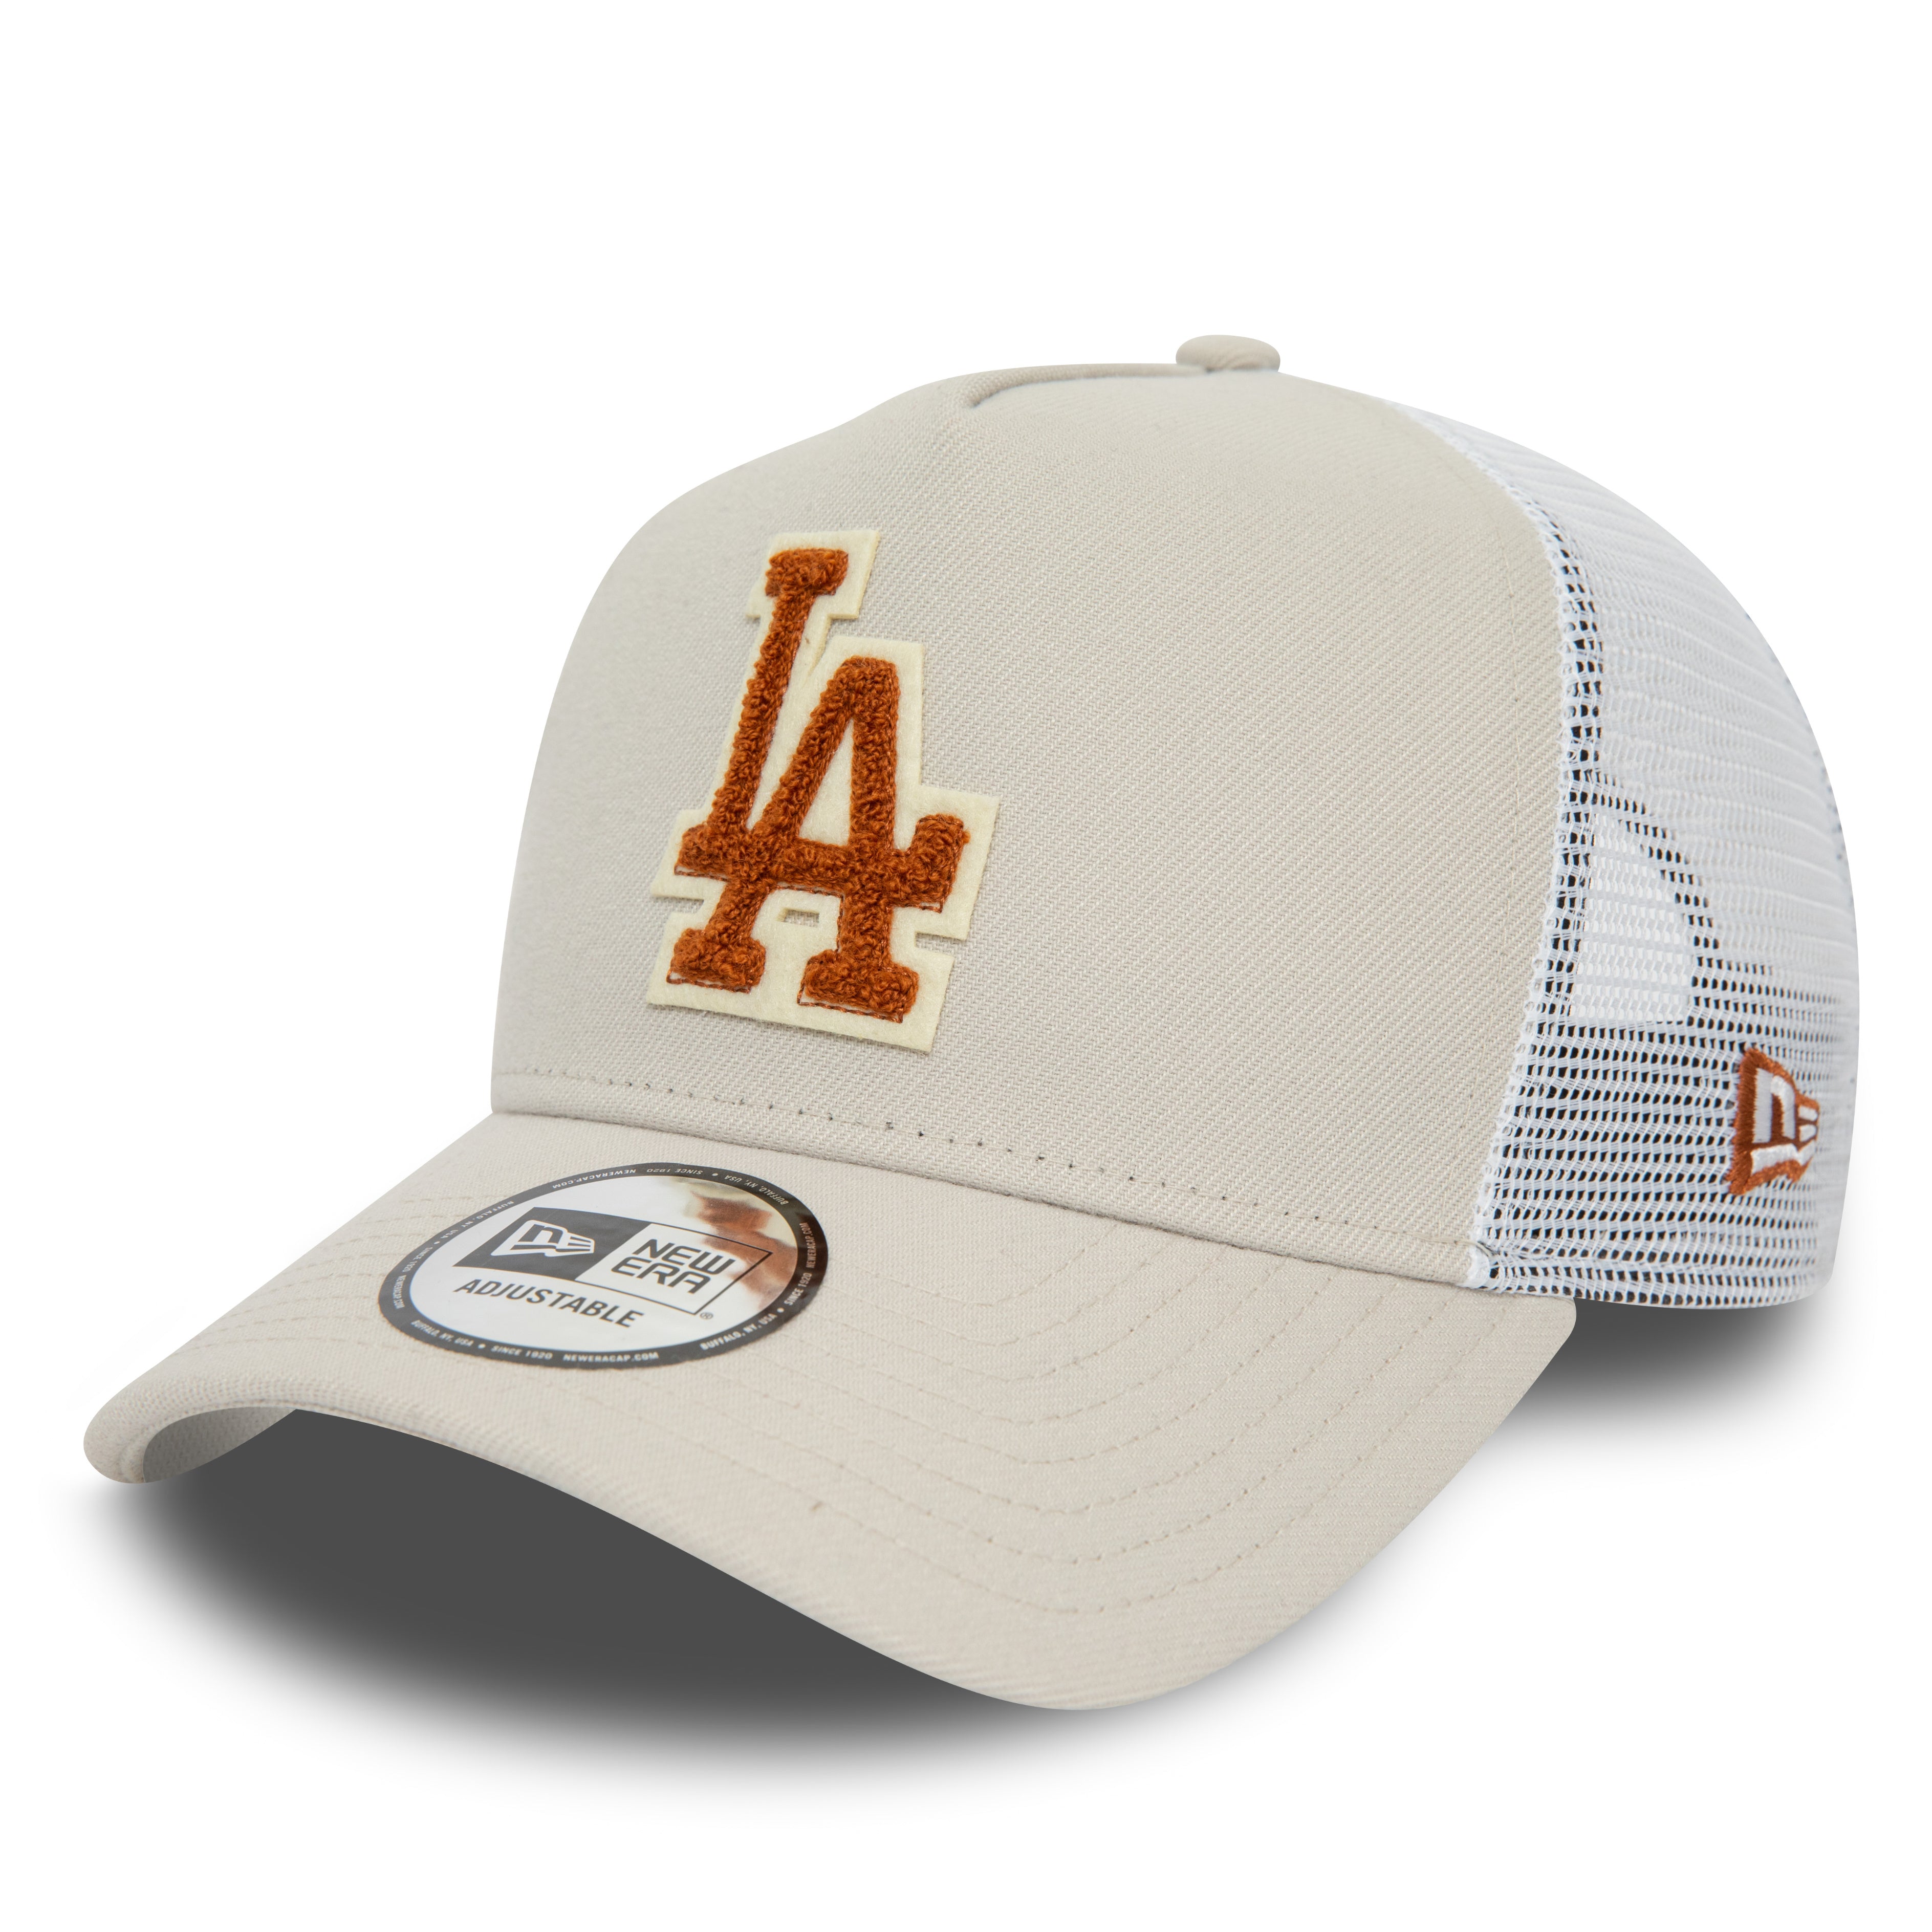 NEW ERA 9FORTY MLB BOUCLE LOS ANGELES DODGERS A-FRAME CREAM TRUCKER